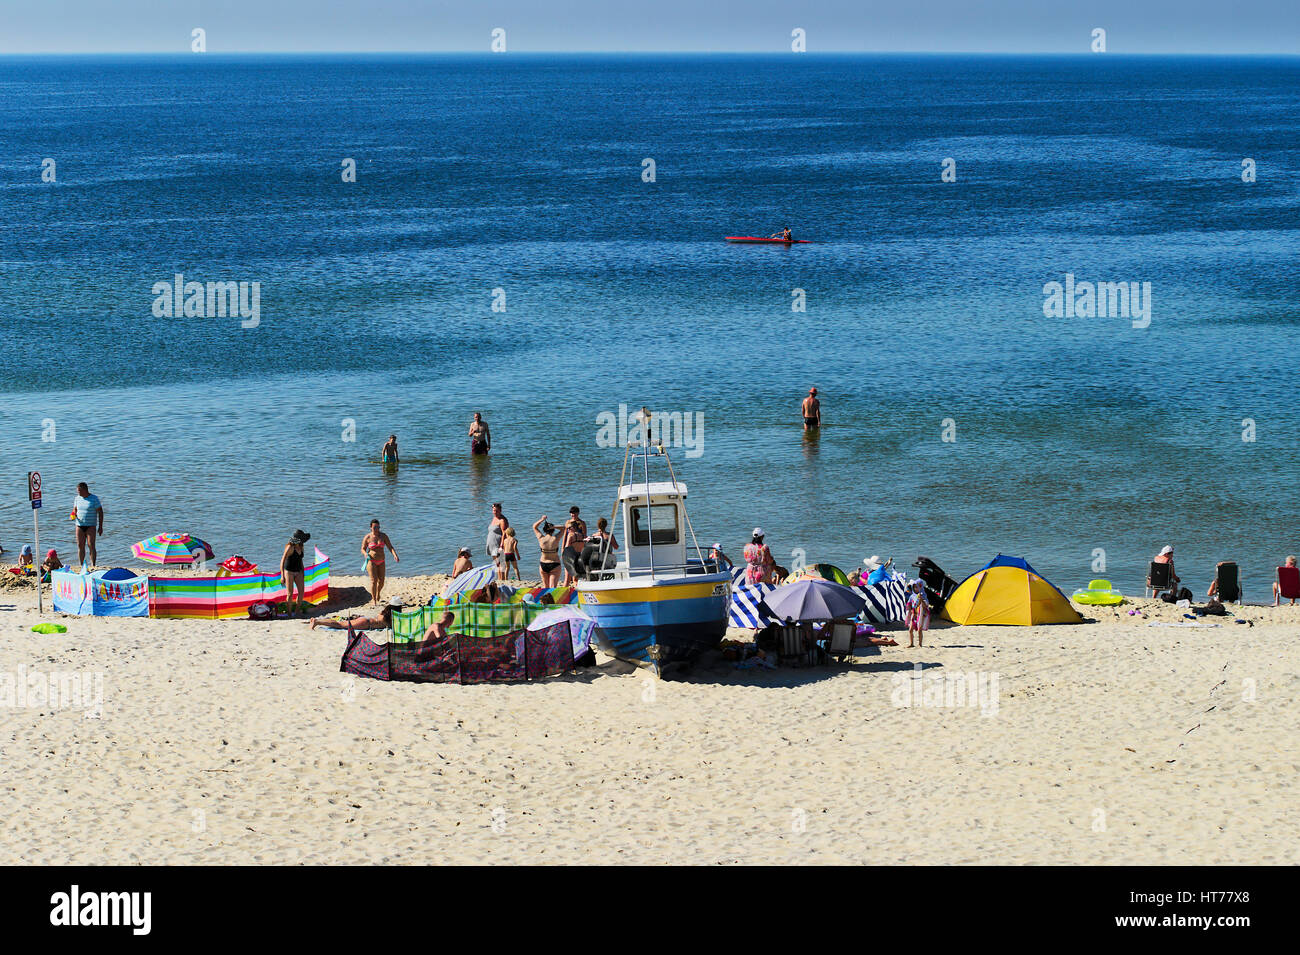 Summer Baltic sea beach with sunbathers on June 24, 2016 in Stegna, Pomerania, Poland. Summer recreation at the seaside. Stock Photo